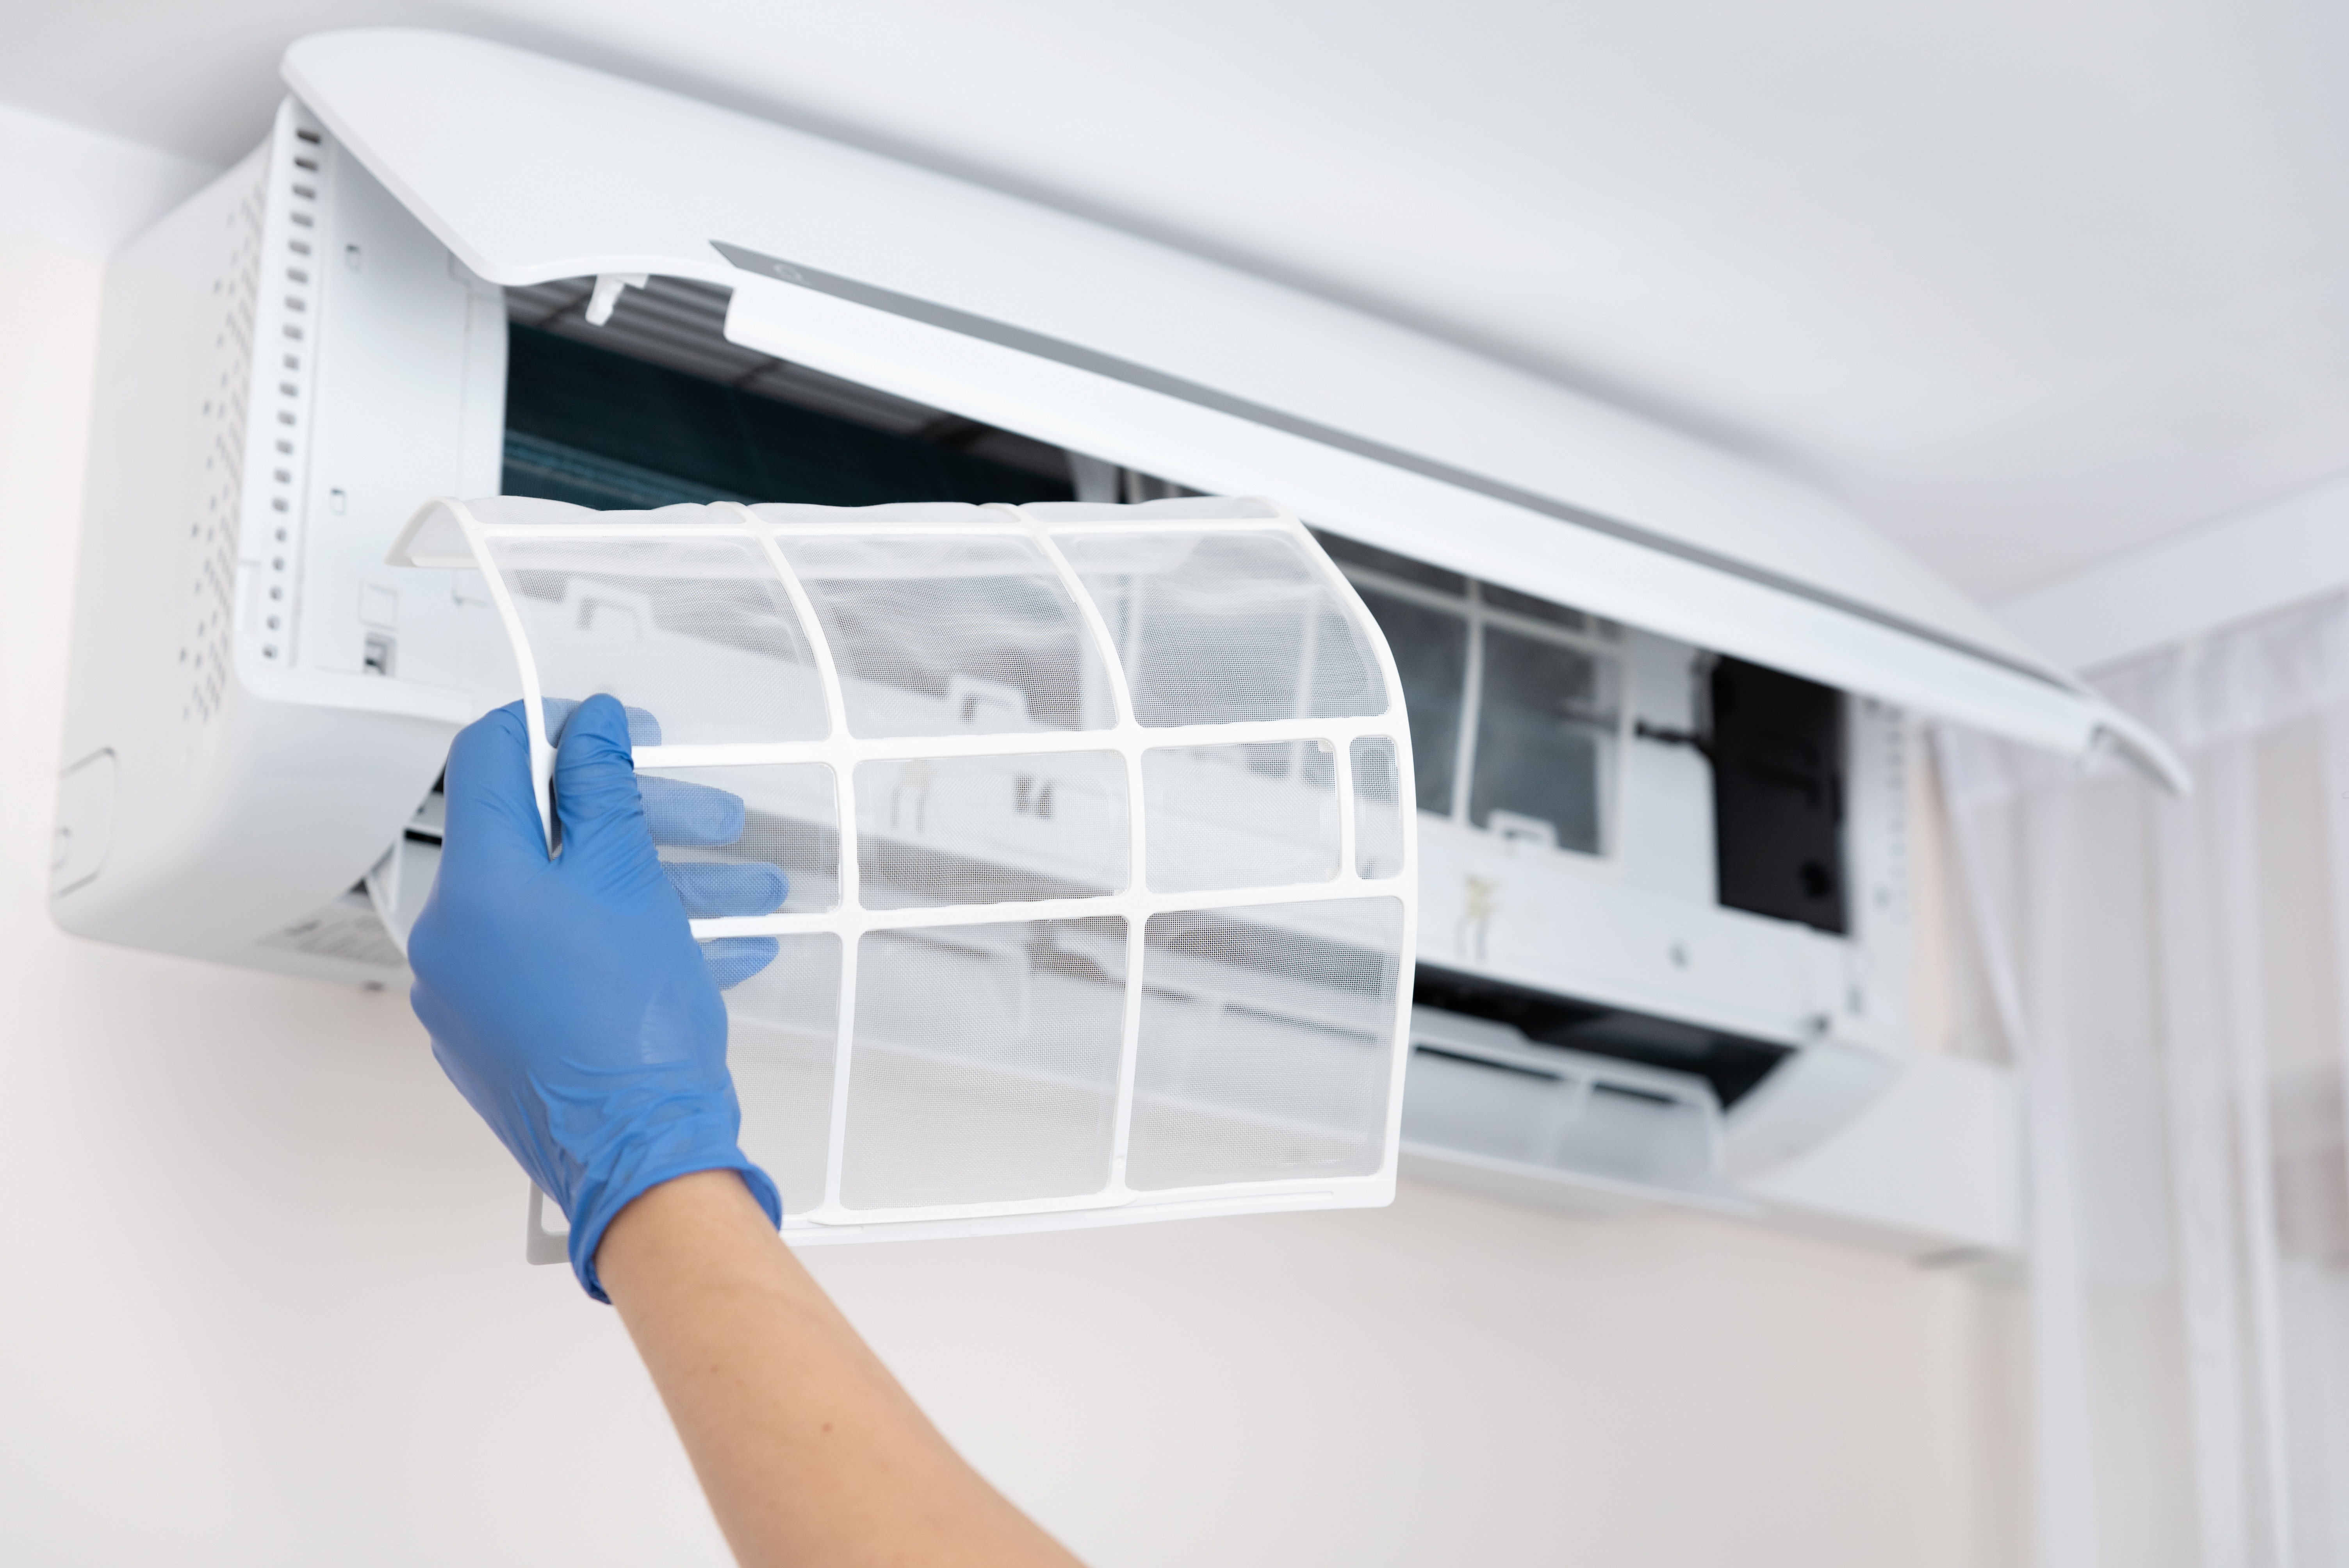 How to Clean Cigarette Smoke from Air Conditioner?